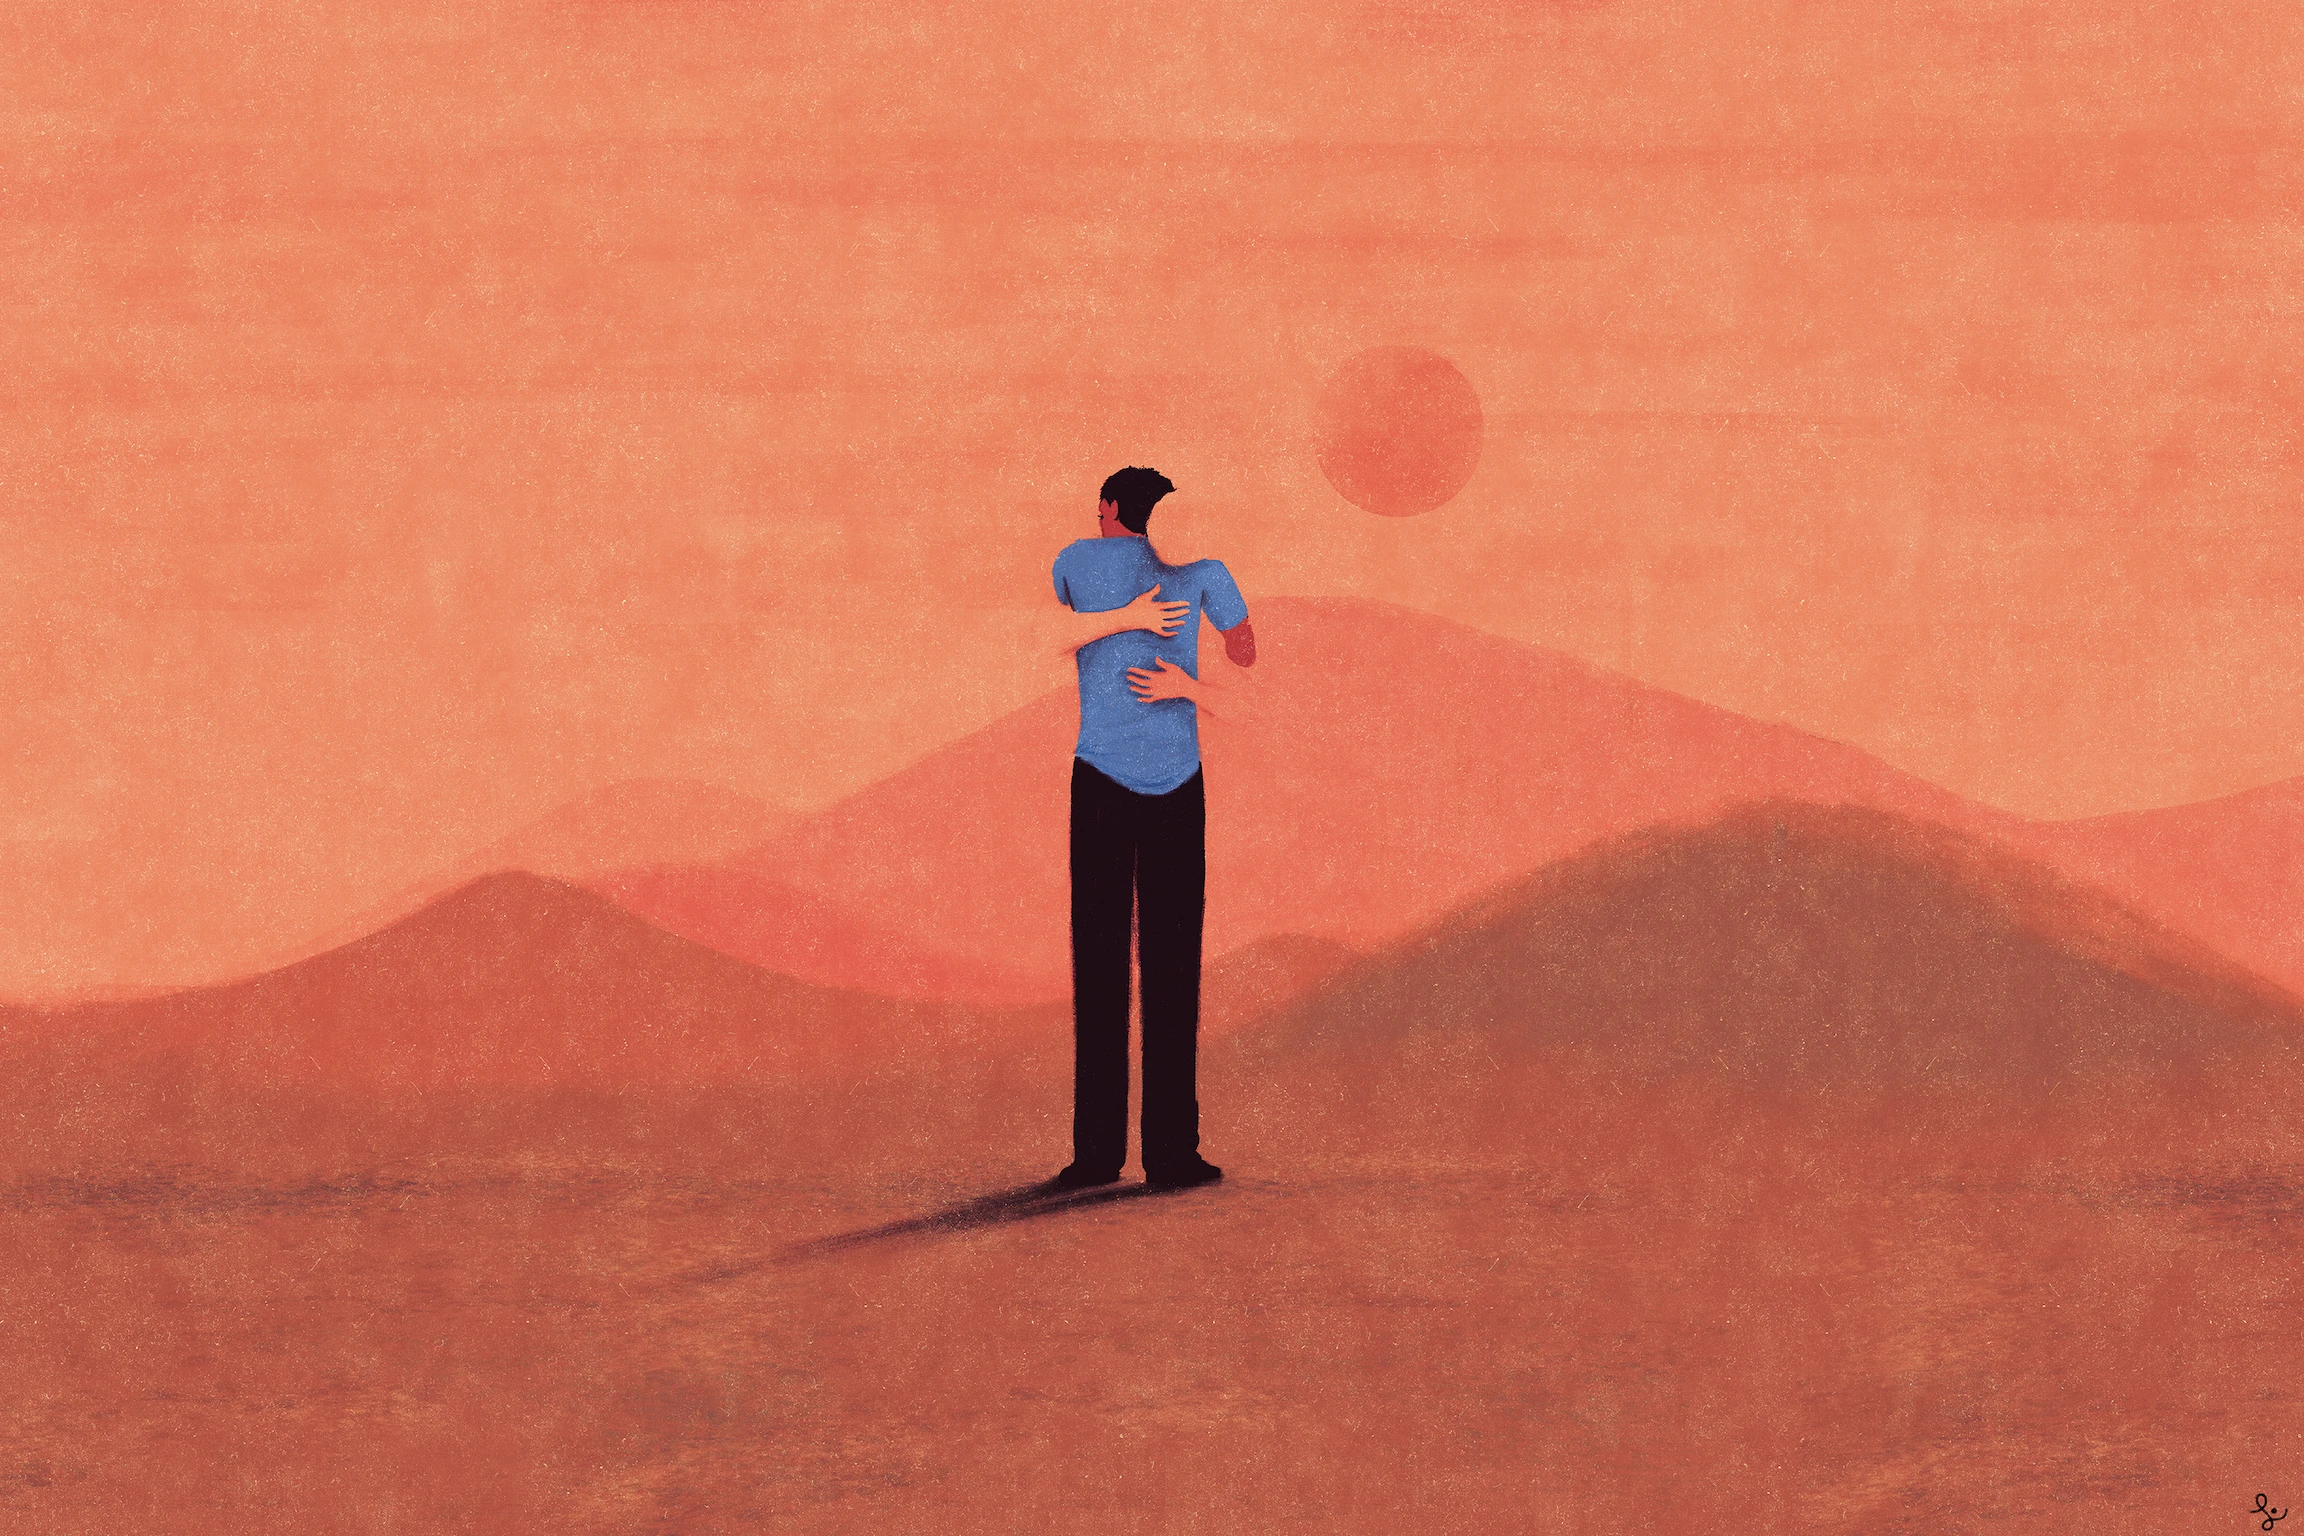 An abstract illustration in which two human figures stand together in embrace in a deserted landscape space with hills or mountains visible in the background. A sun is in the sky. 